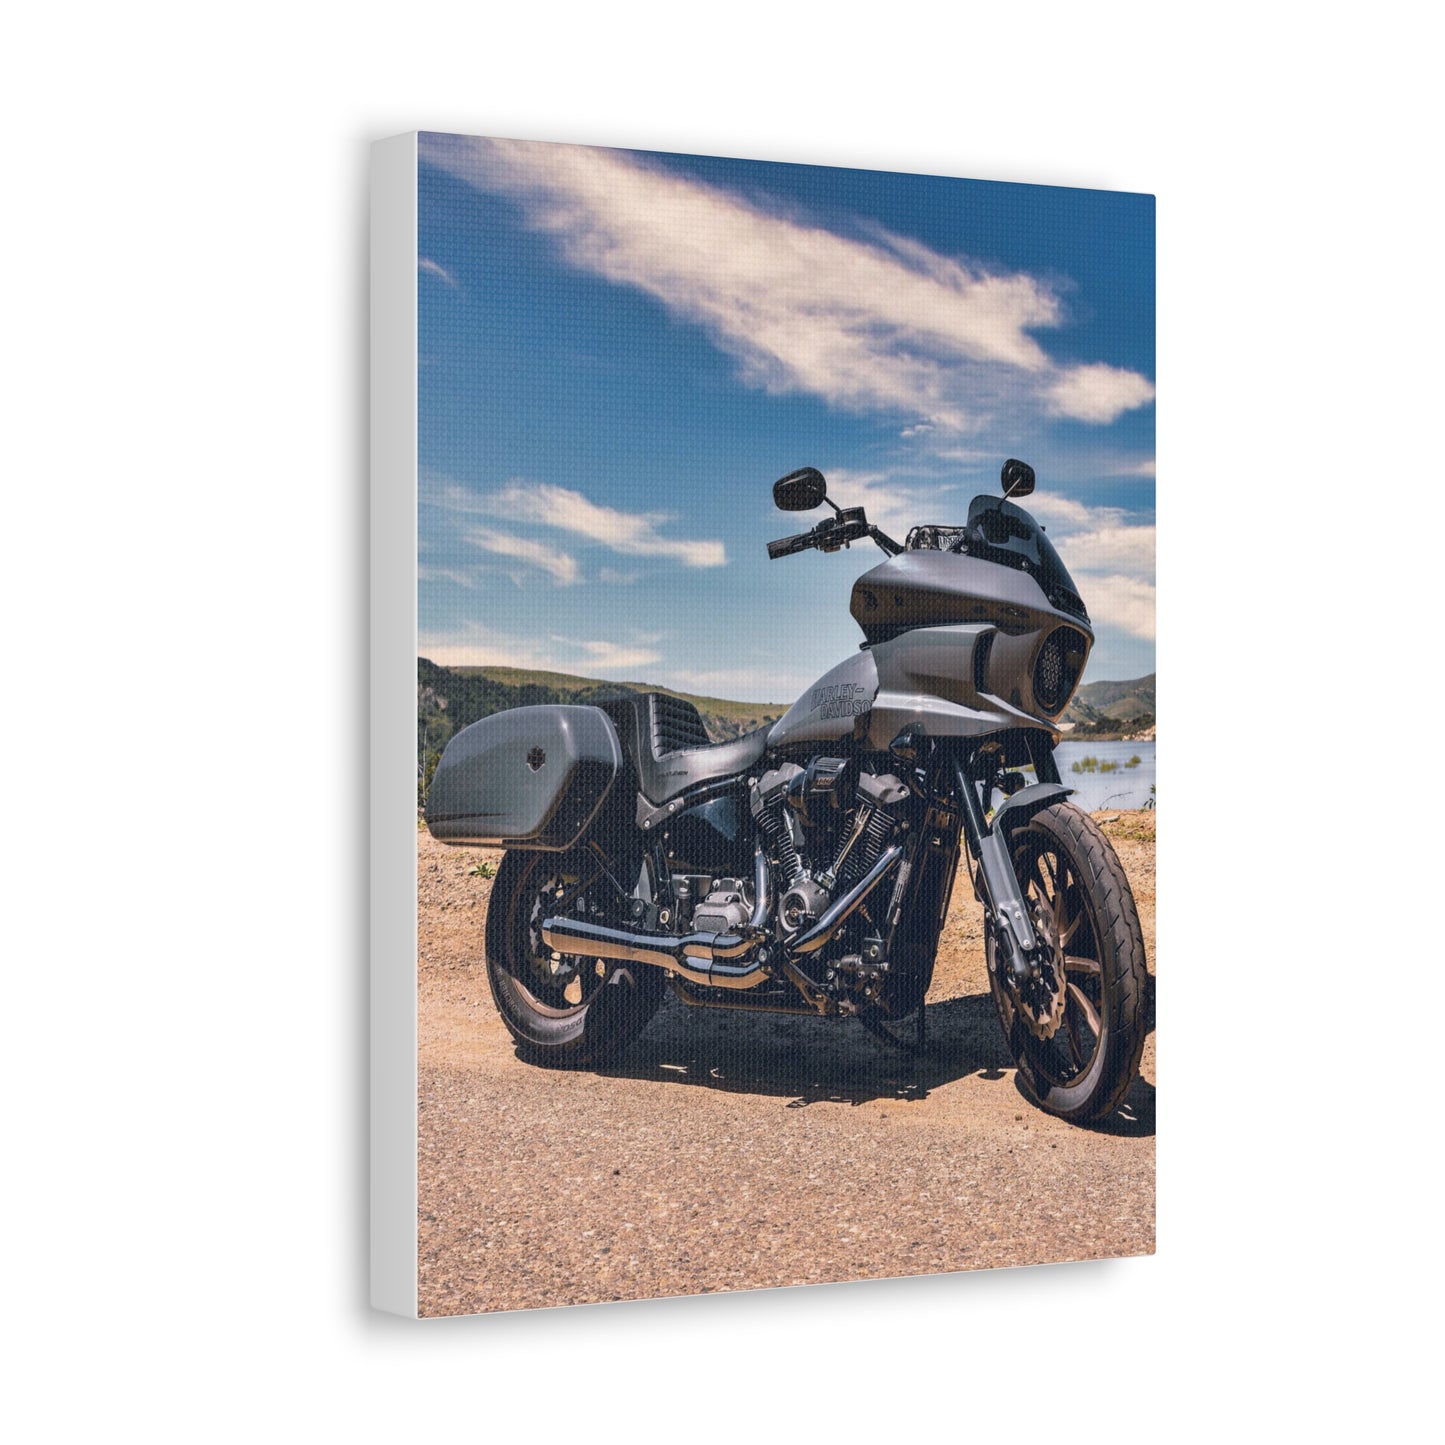 Softail M8 FXLRST - Oak Canyon Ranch, California Canvas Gallery Wraps